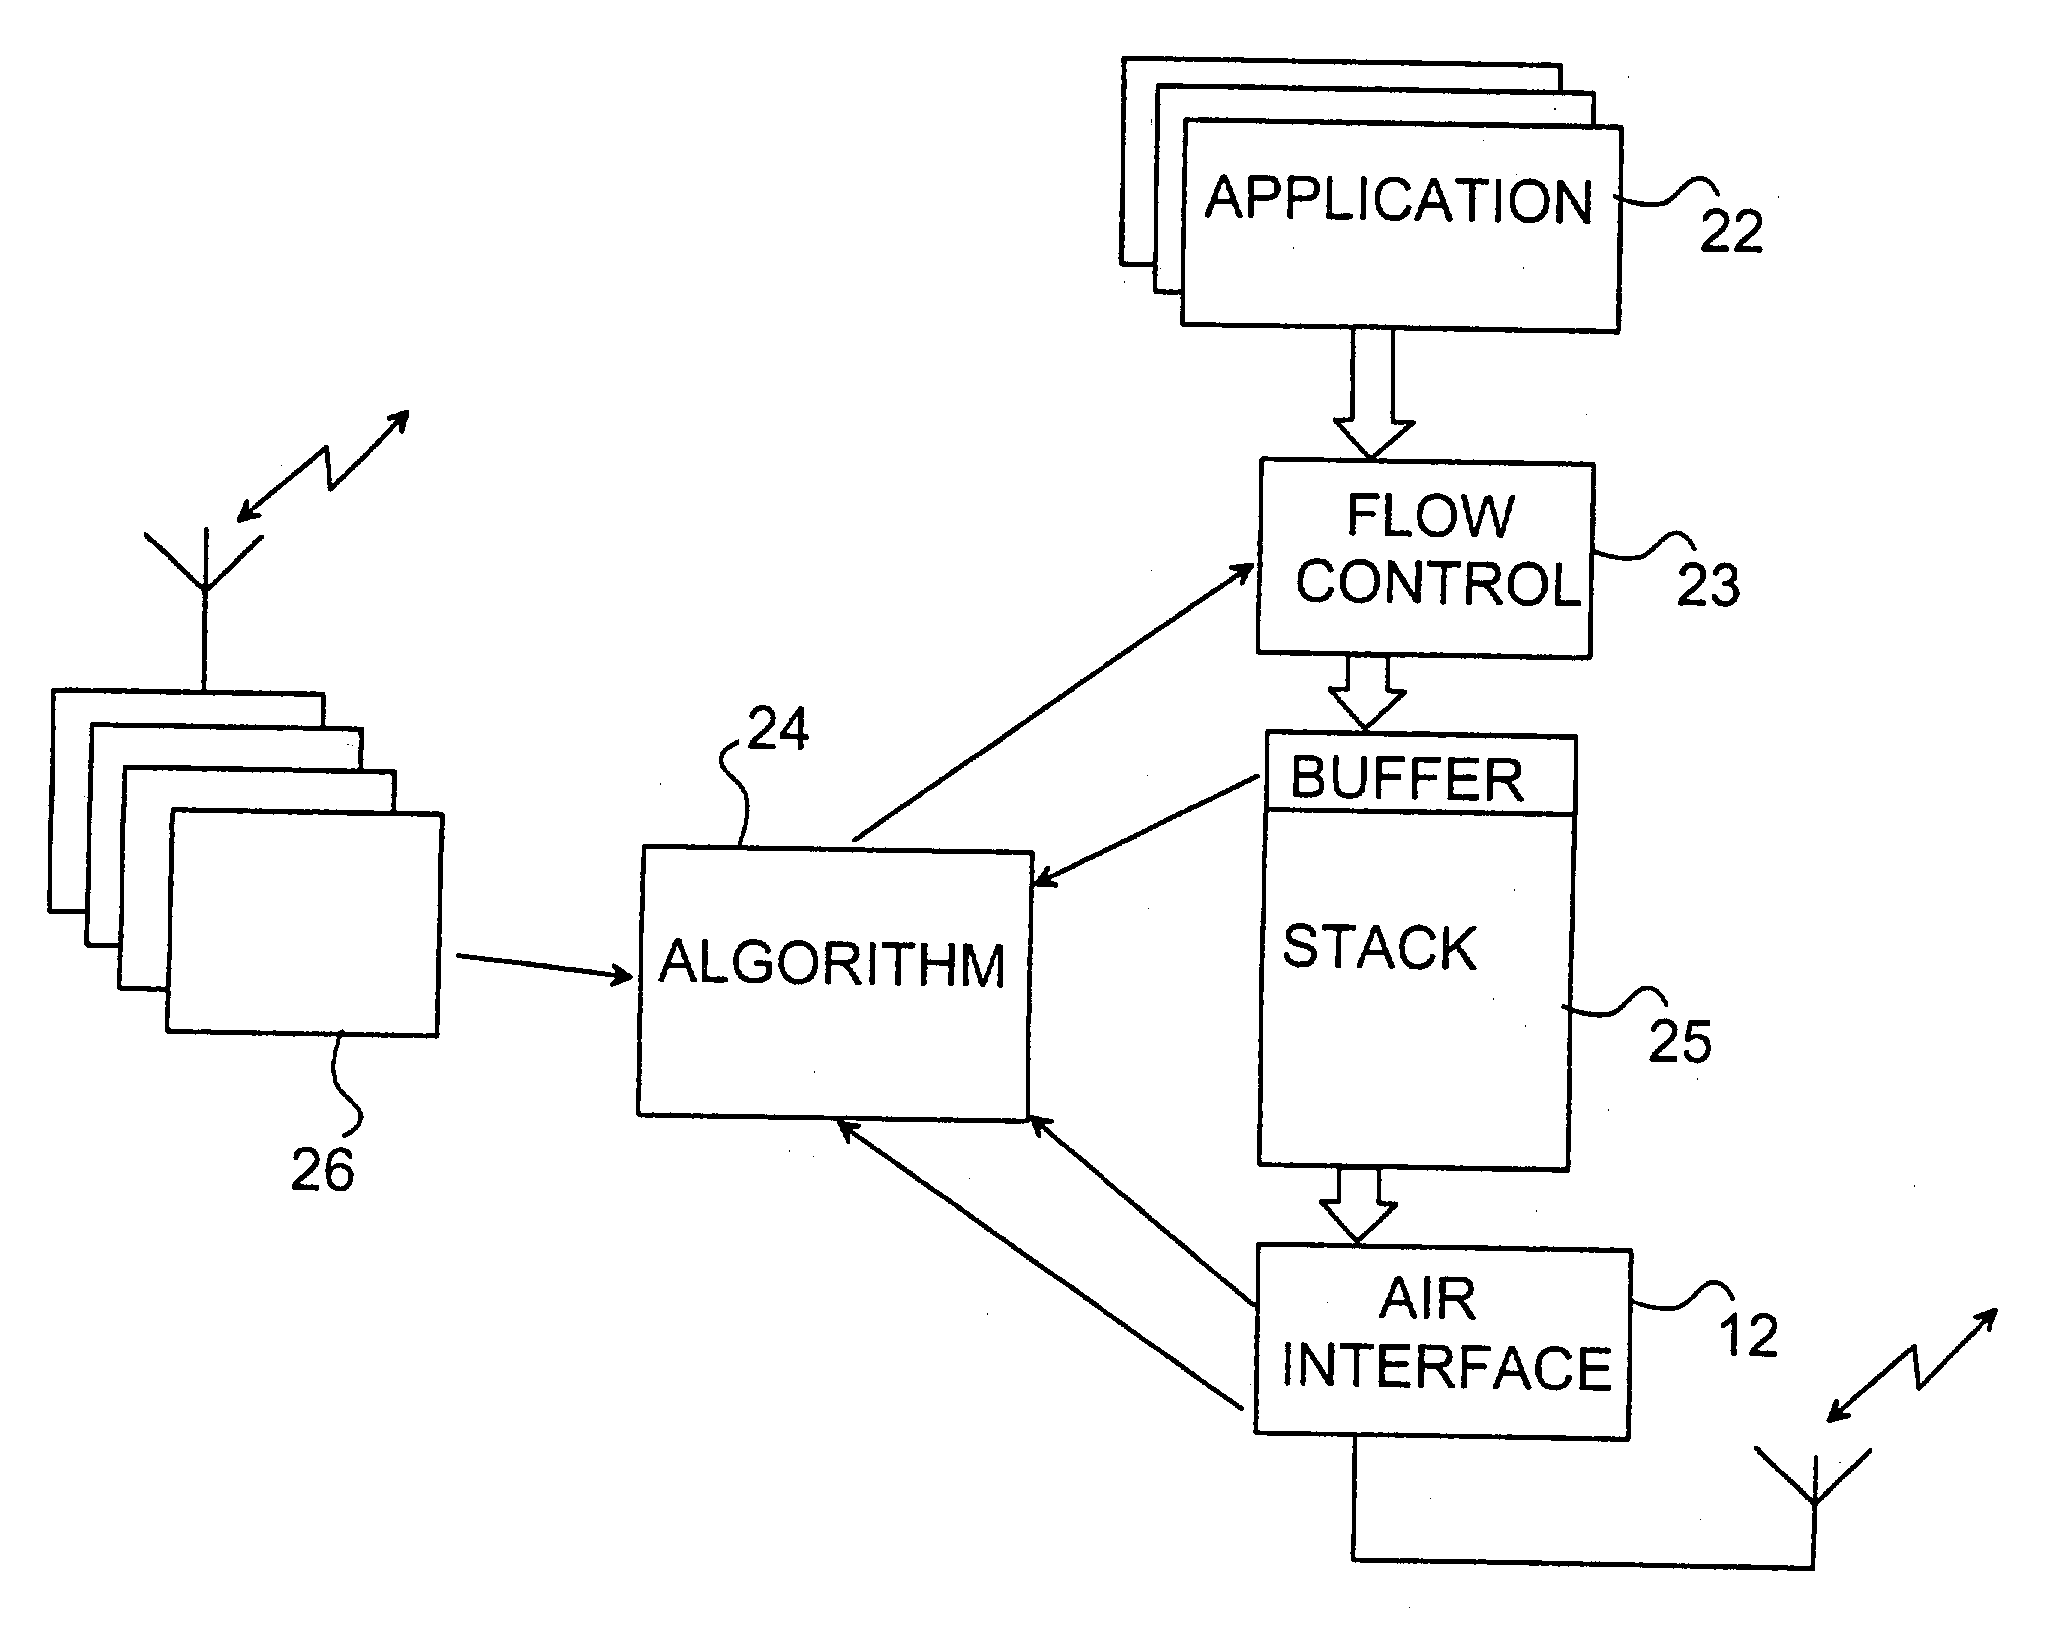 Method for controlling transmitting power in a wireless communication device